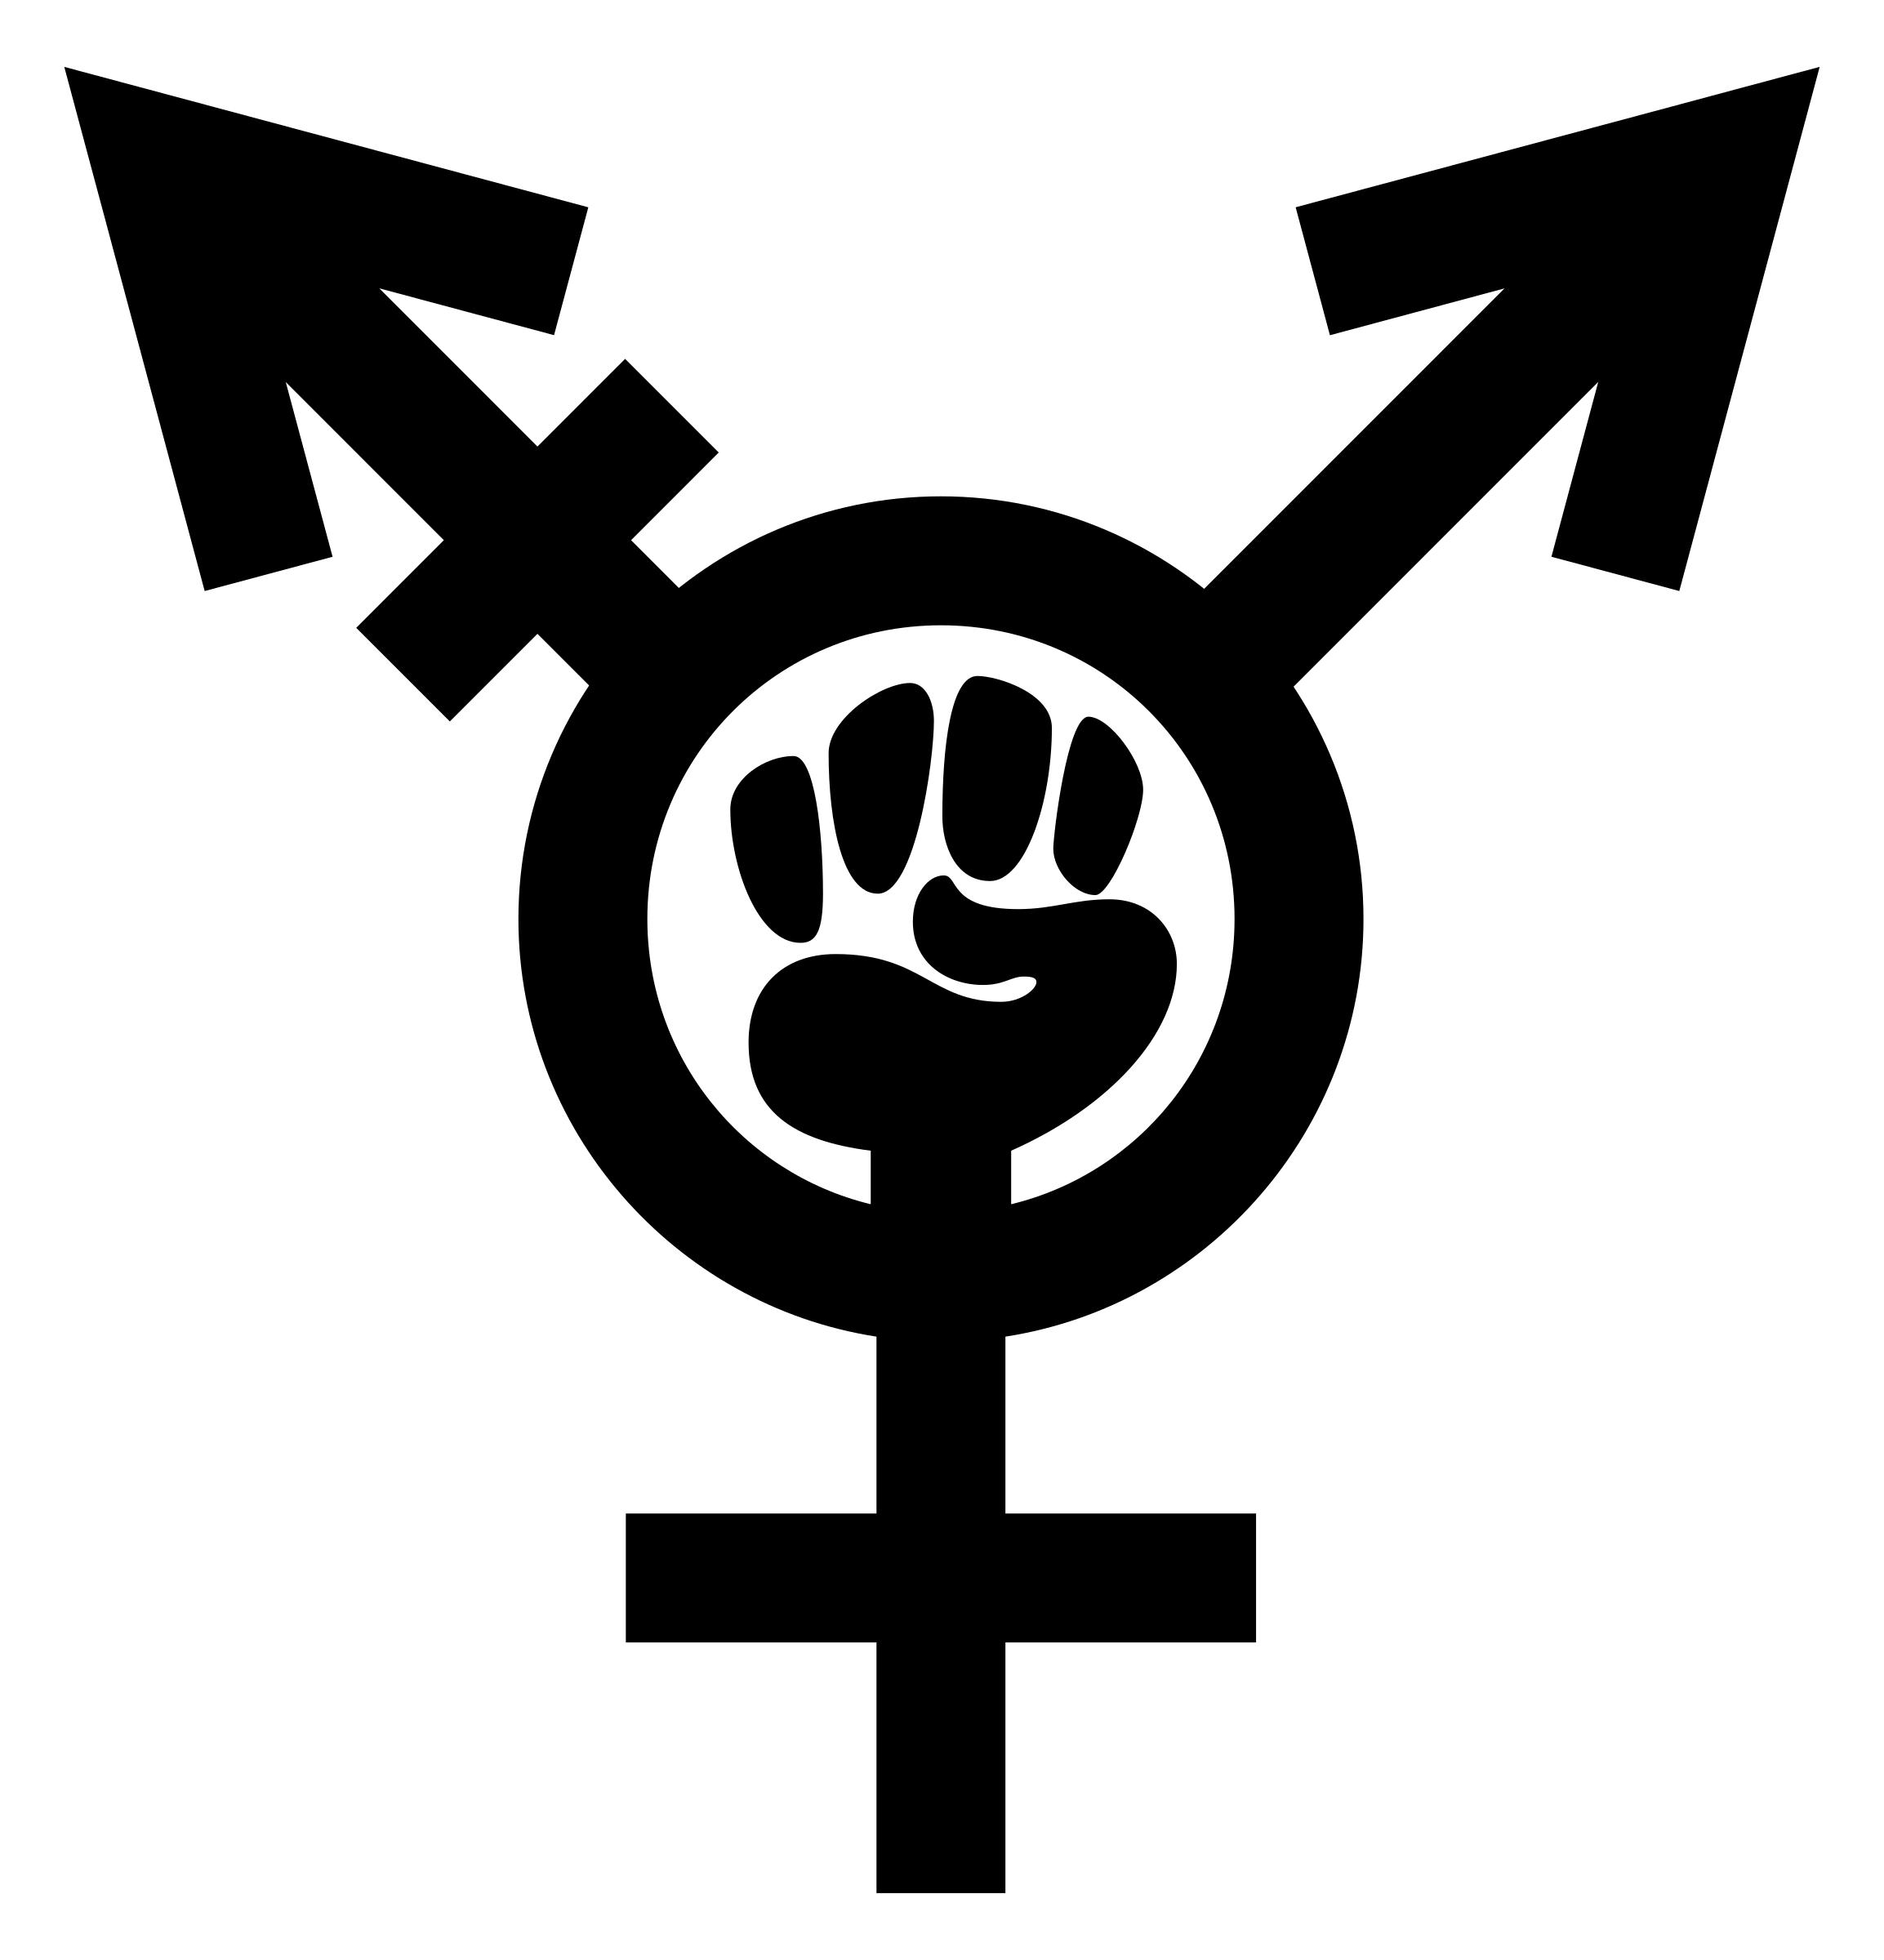 all genders - fight united PNG icons